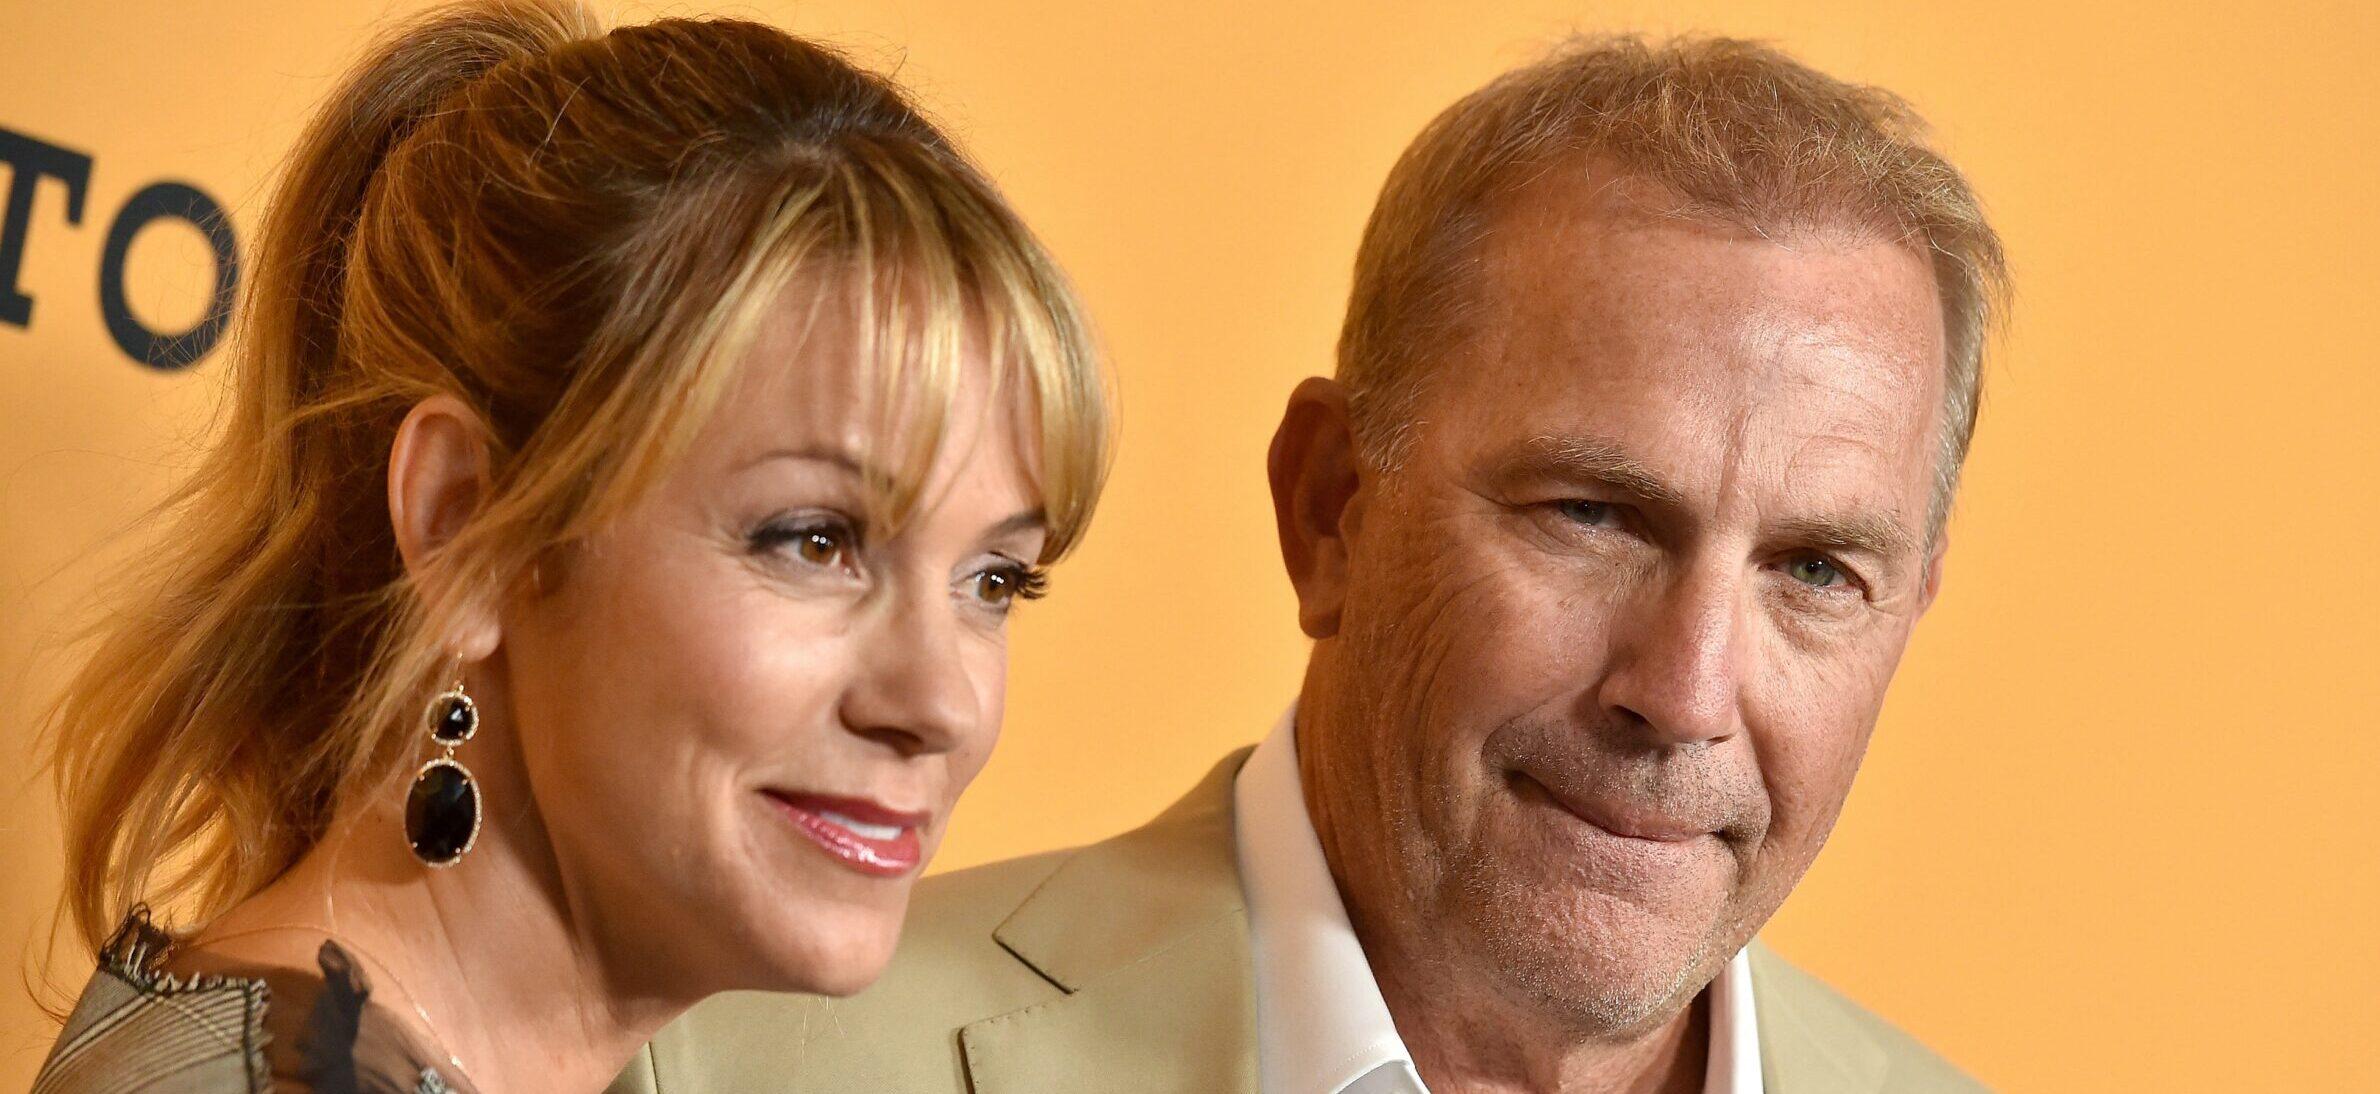 Kevin Costner Slams $248K Monthly Child Support Bill, Claims It Includes Wife’s Plastic Surgery Expenses